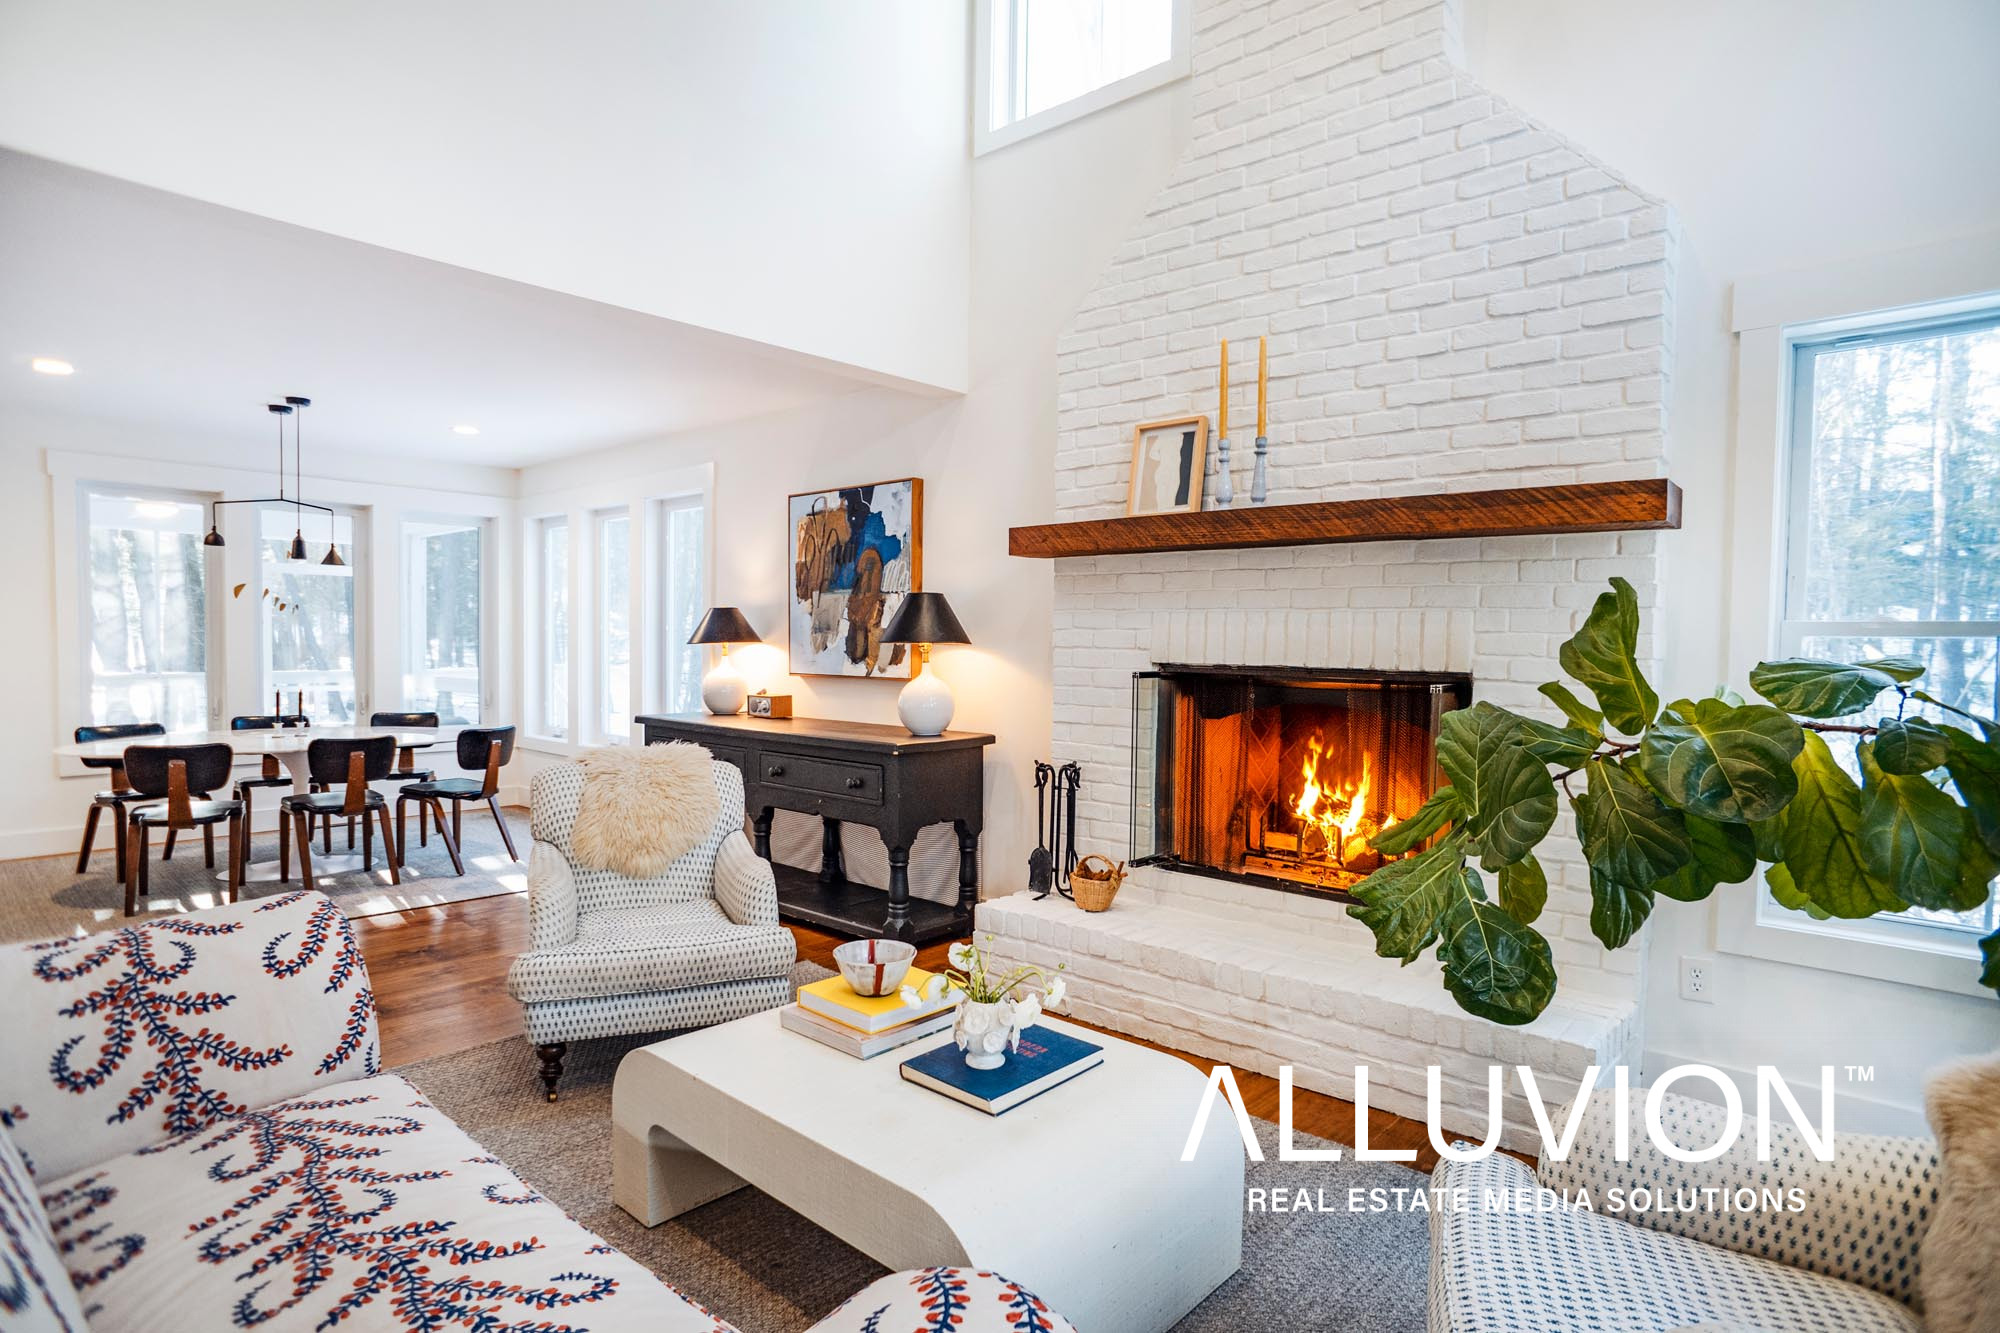 Modern Farmhouse in Catskill Mountains – Airbnb / Real Estate Photography by Maxwell Alexander – The Best Airbnb Photography and Vacation Rental Management by ALLUVION Real Estate